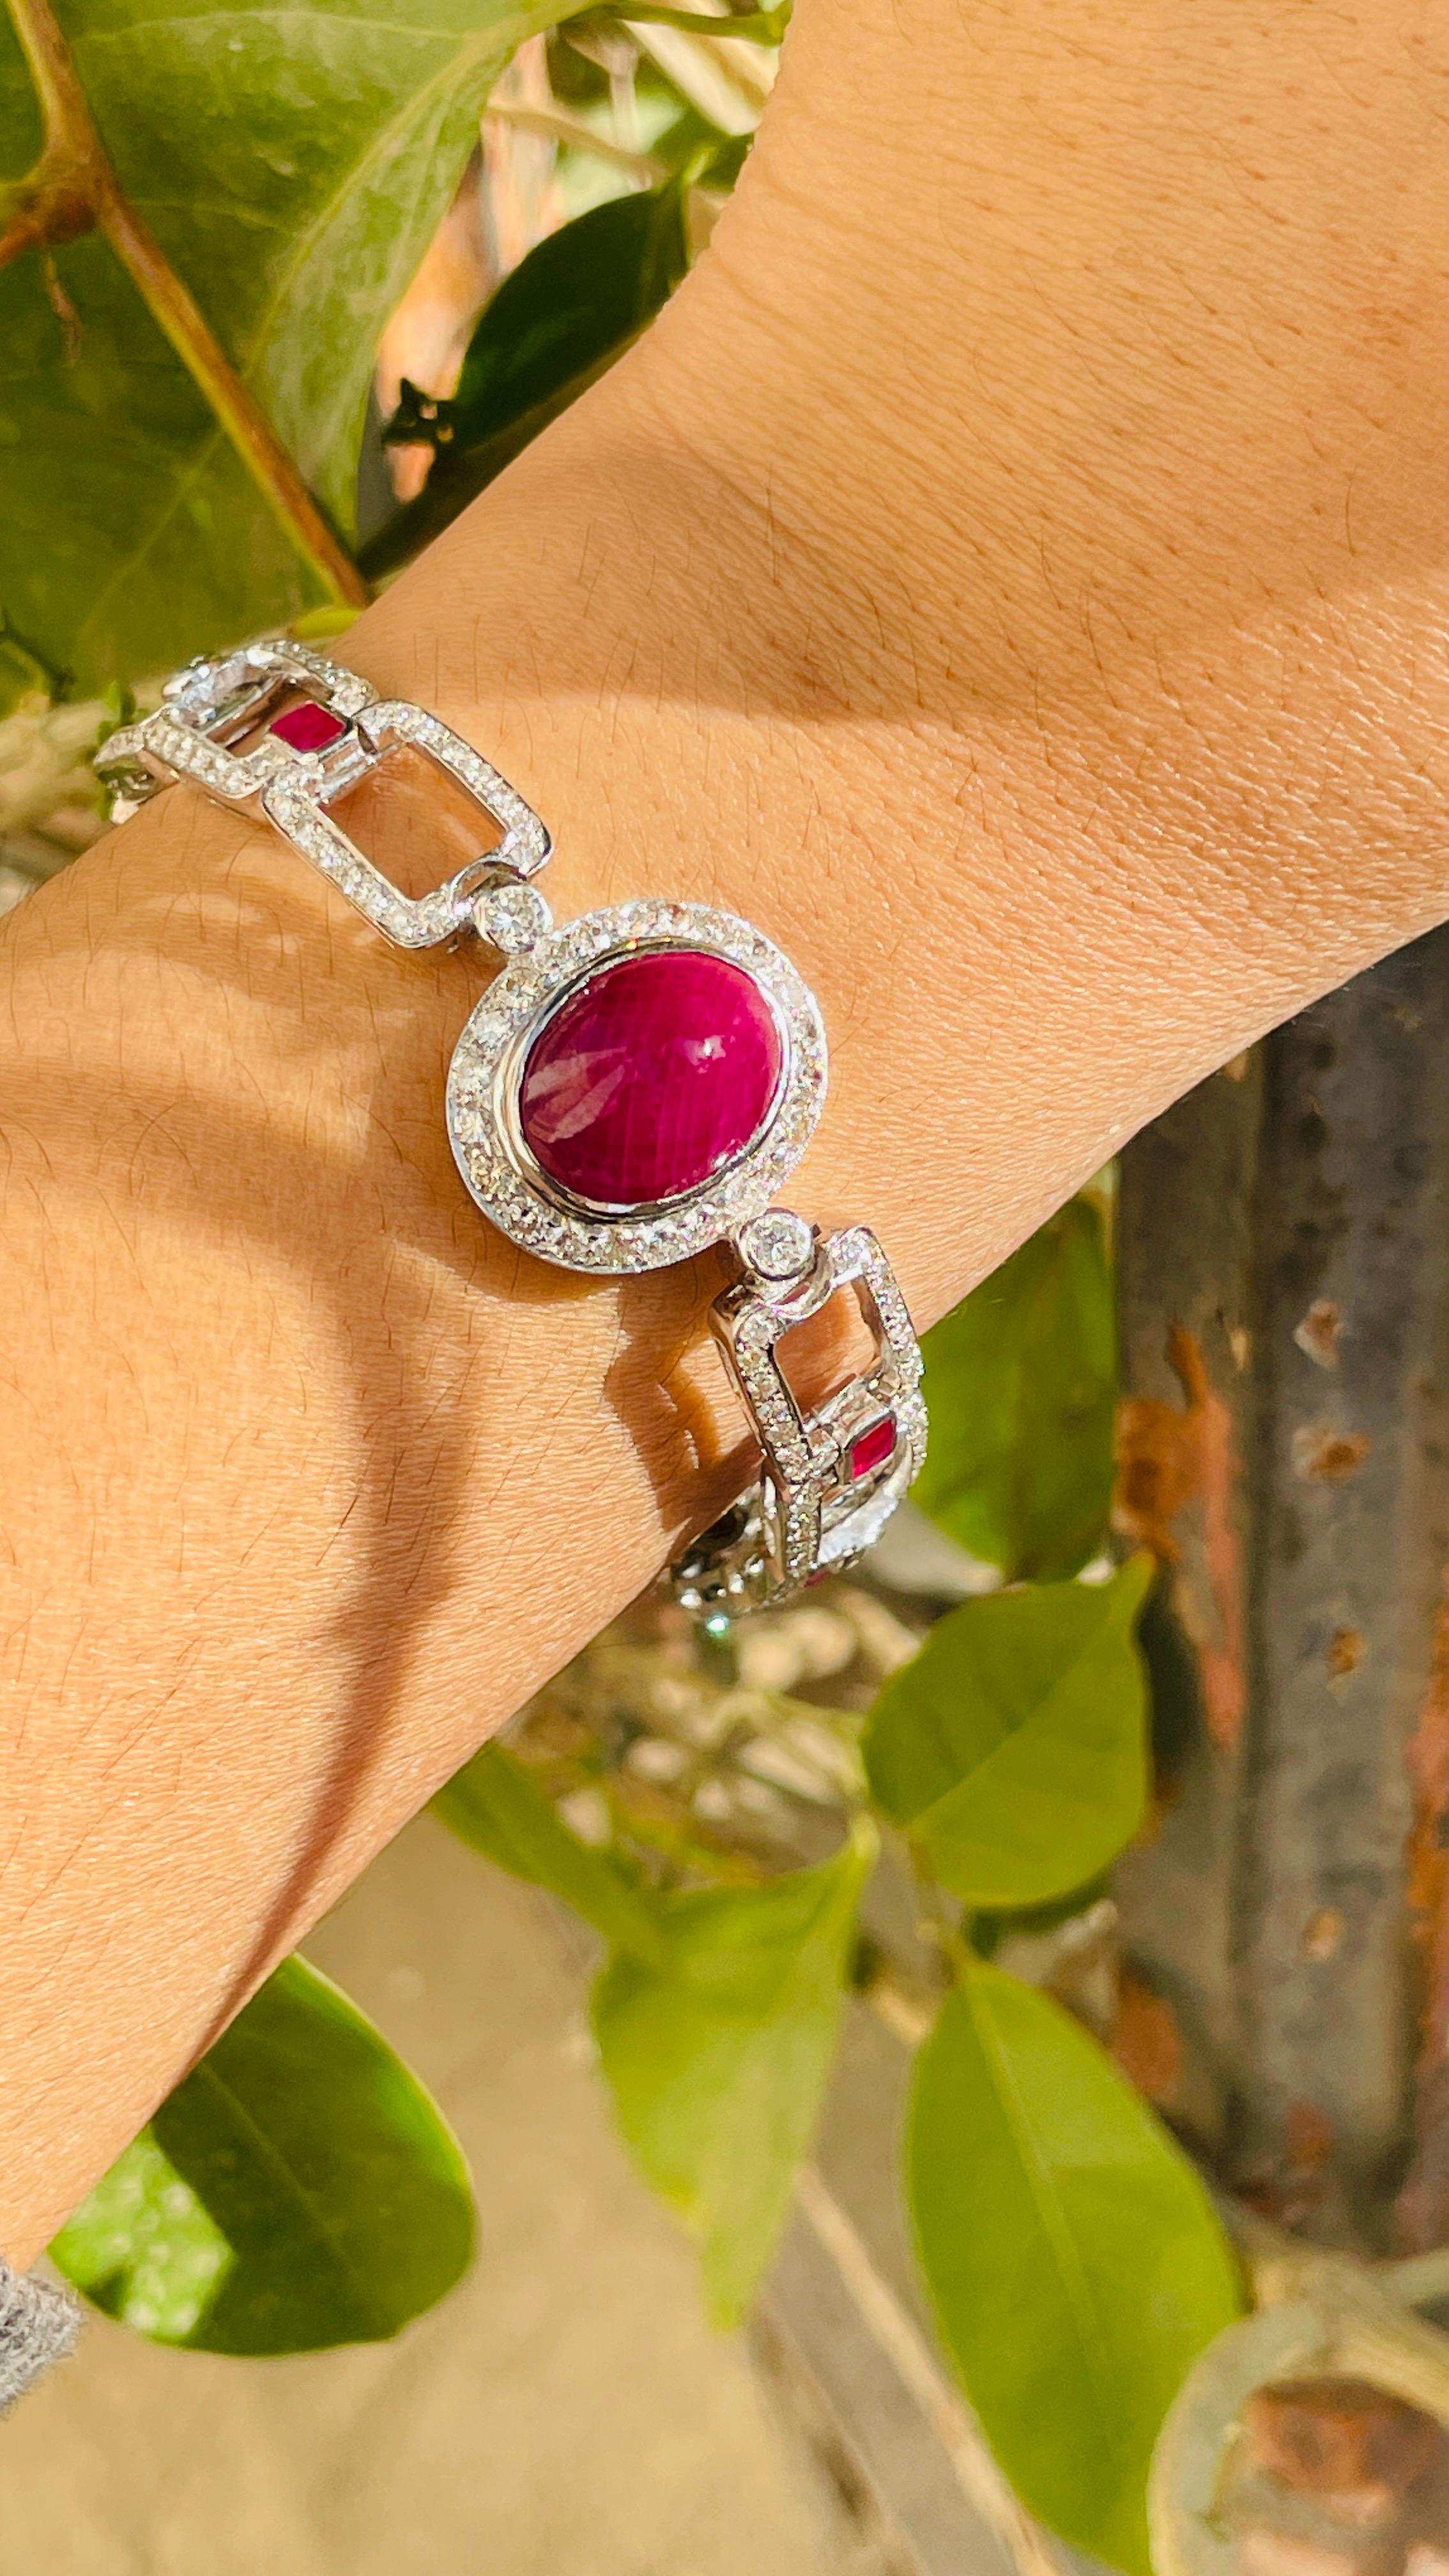 Ruby and Diamond bracelet in 18K Gold. It has a perfect oval cut gemstone to make you stand out on any occasion or an event.
A link bracelet is an essential piece of jewelry when it comes to your wedding day. The sleek and elegant style complements